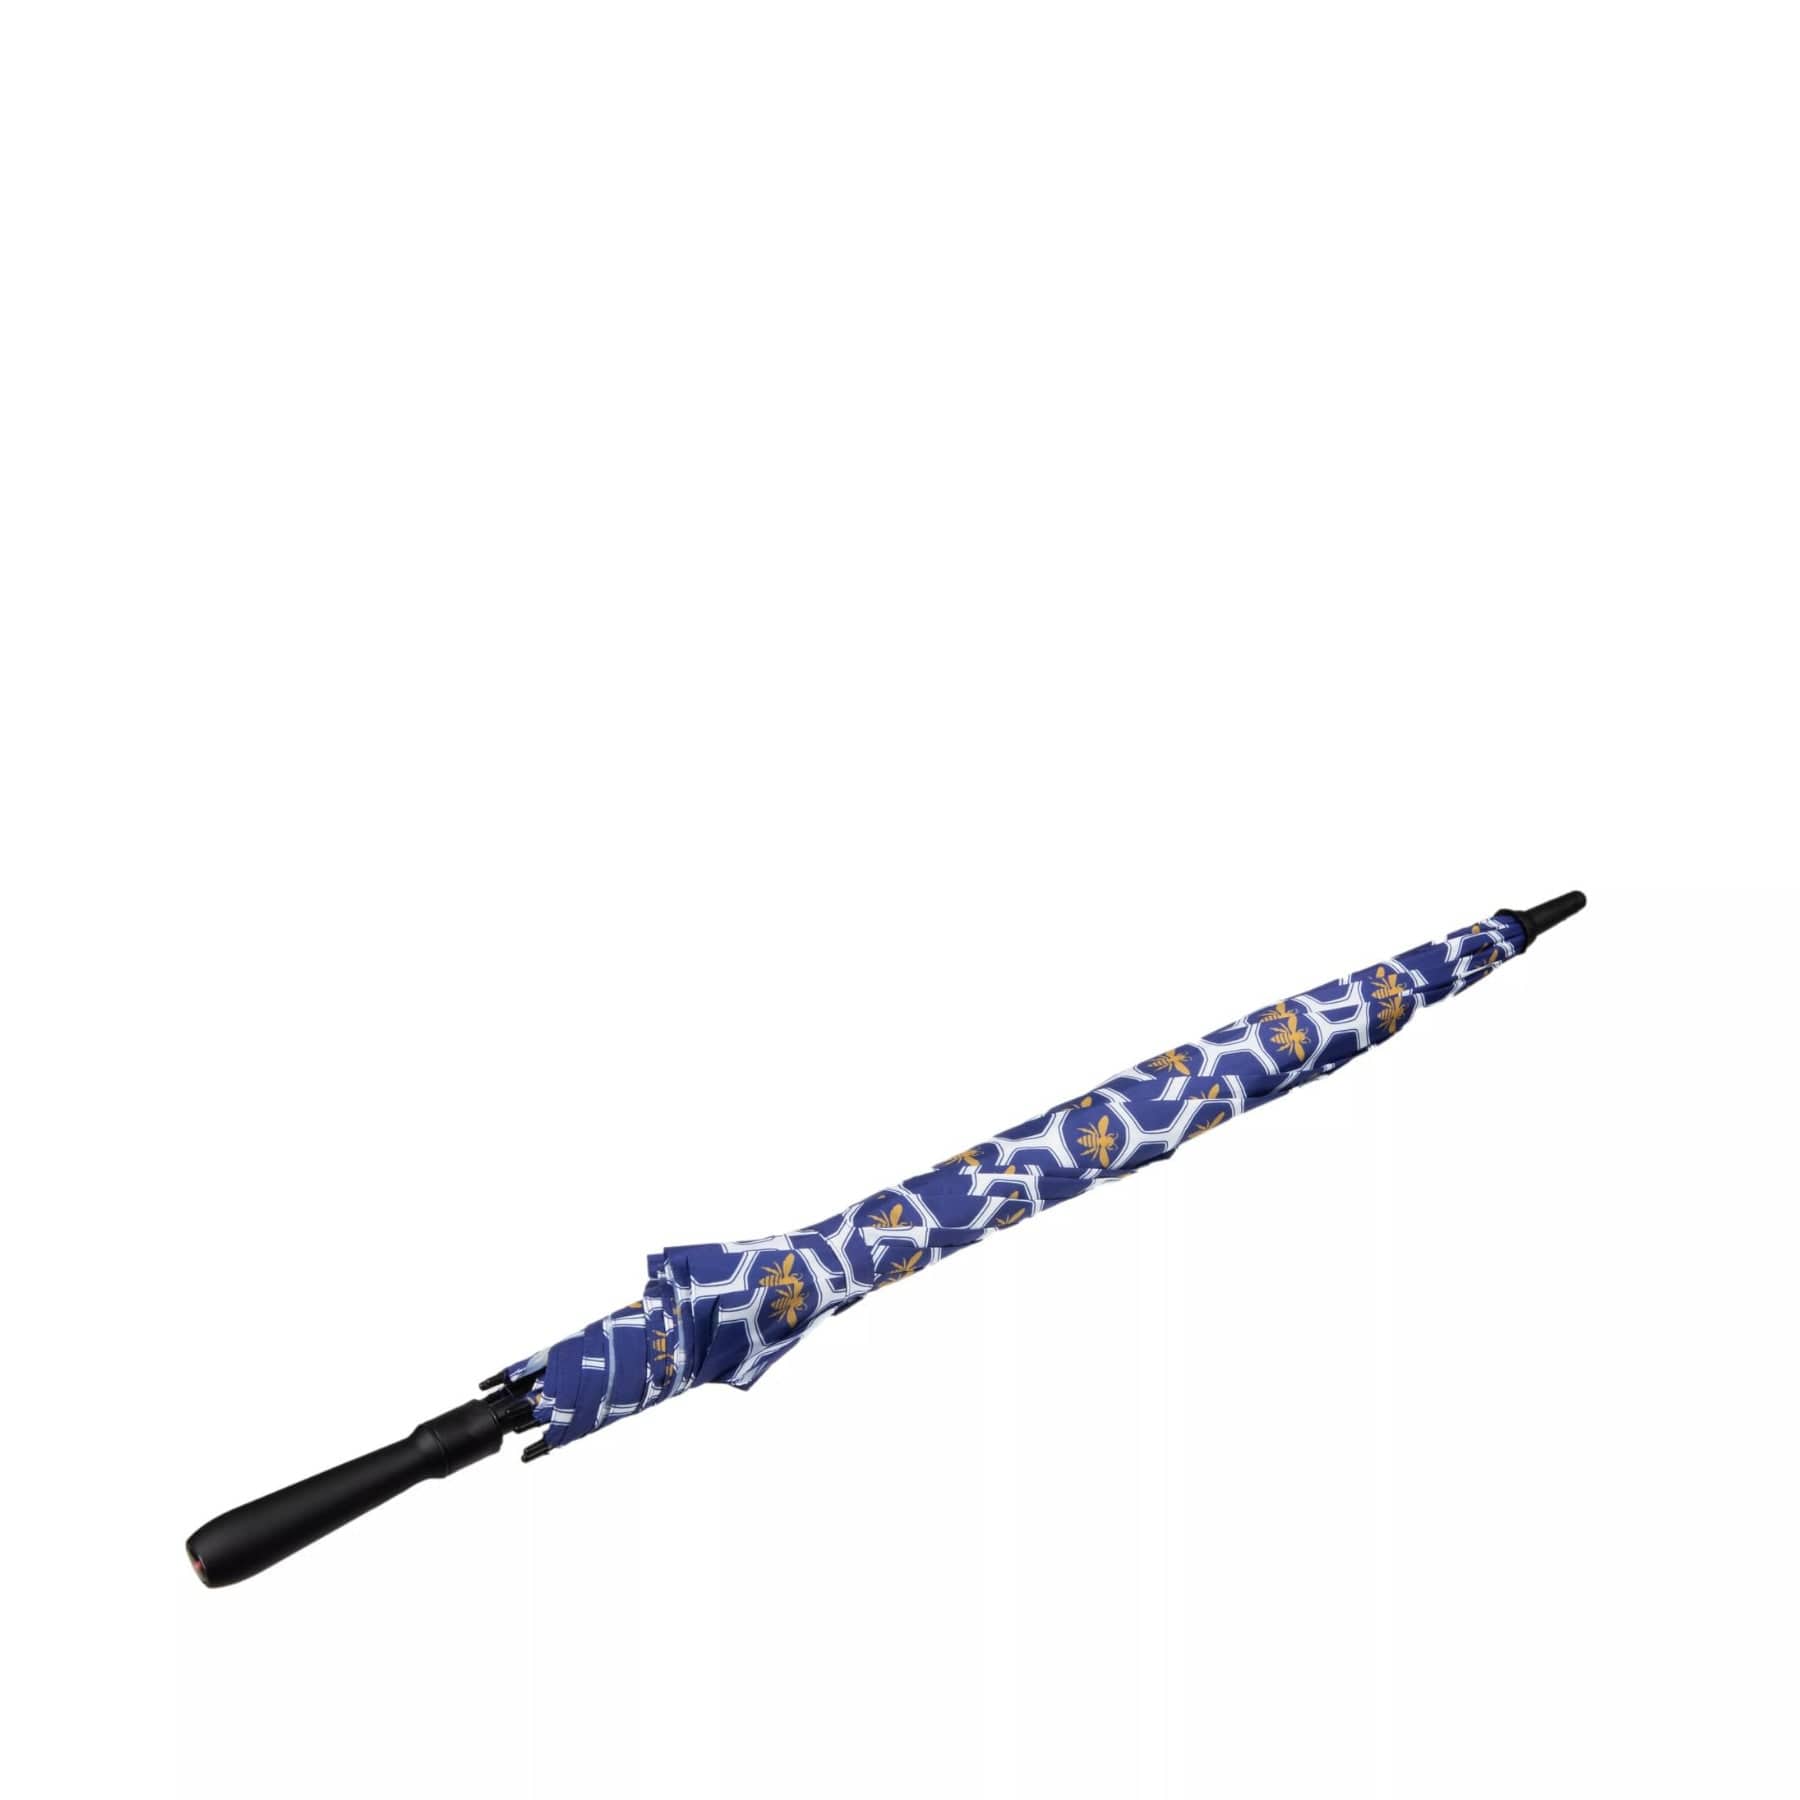 Patterned blue and white floral retractable umbrella with black handle and tip isolated on white background